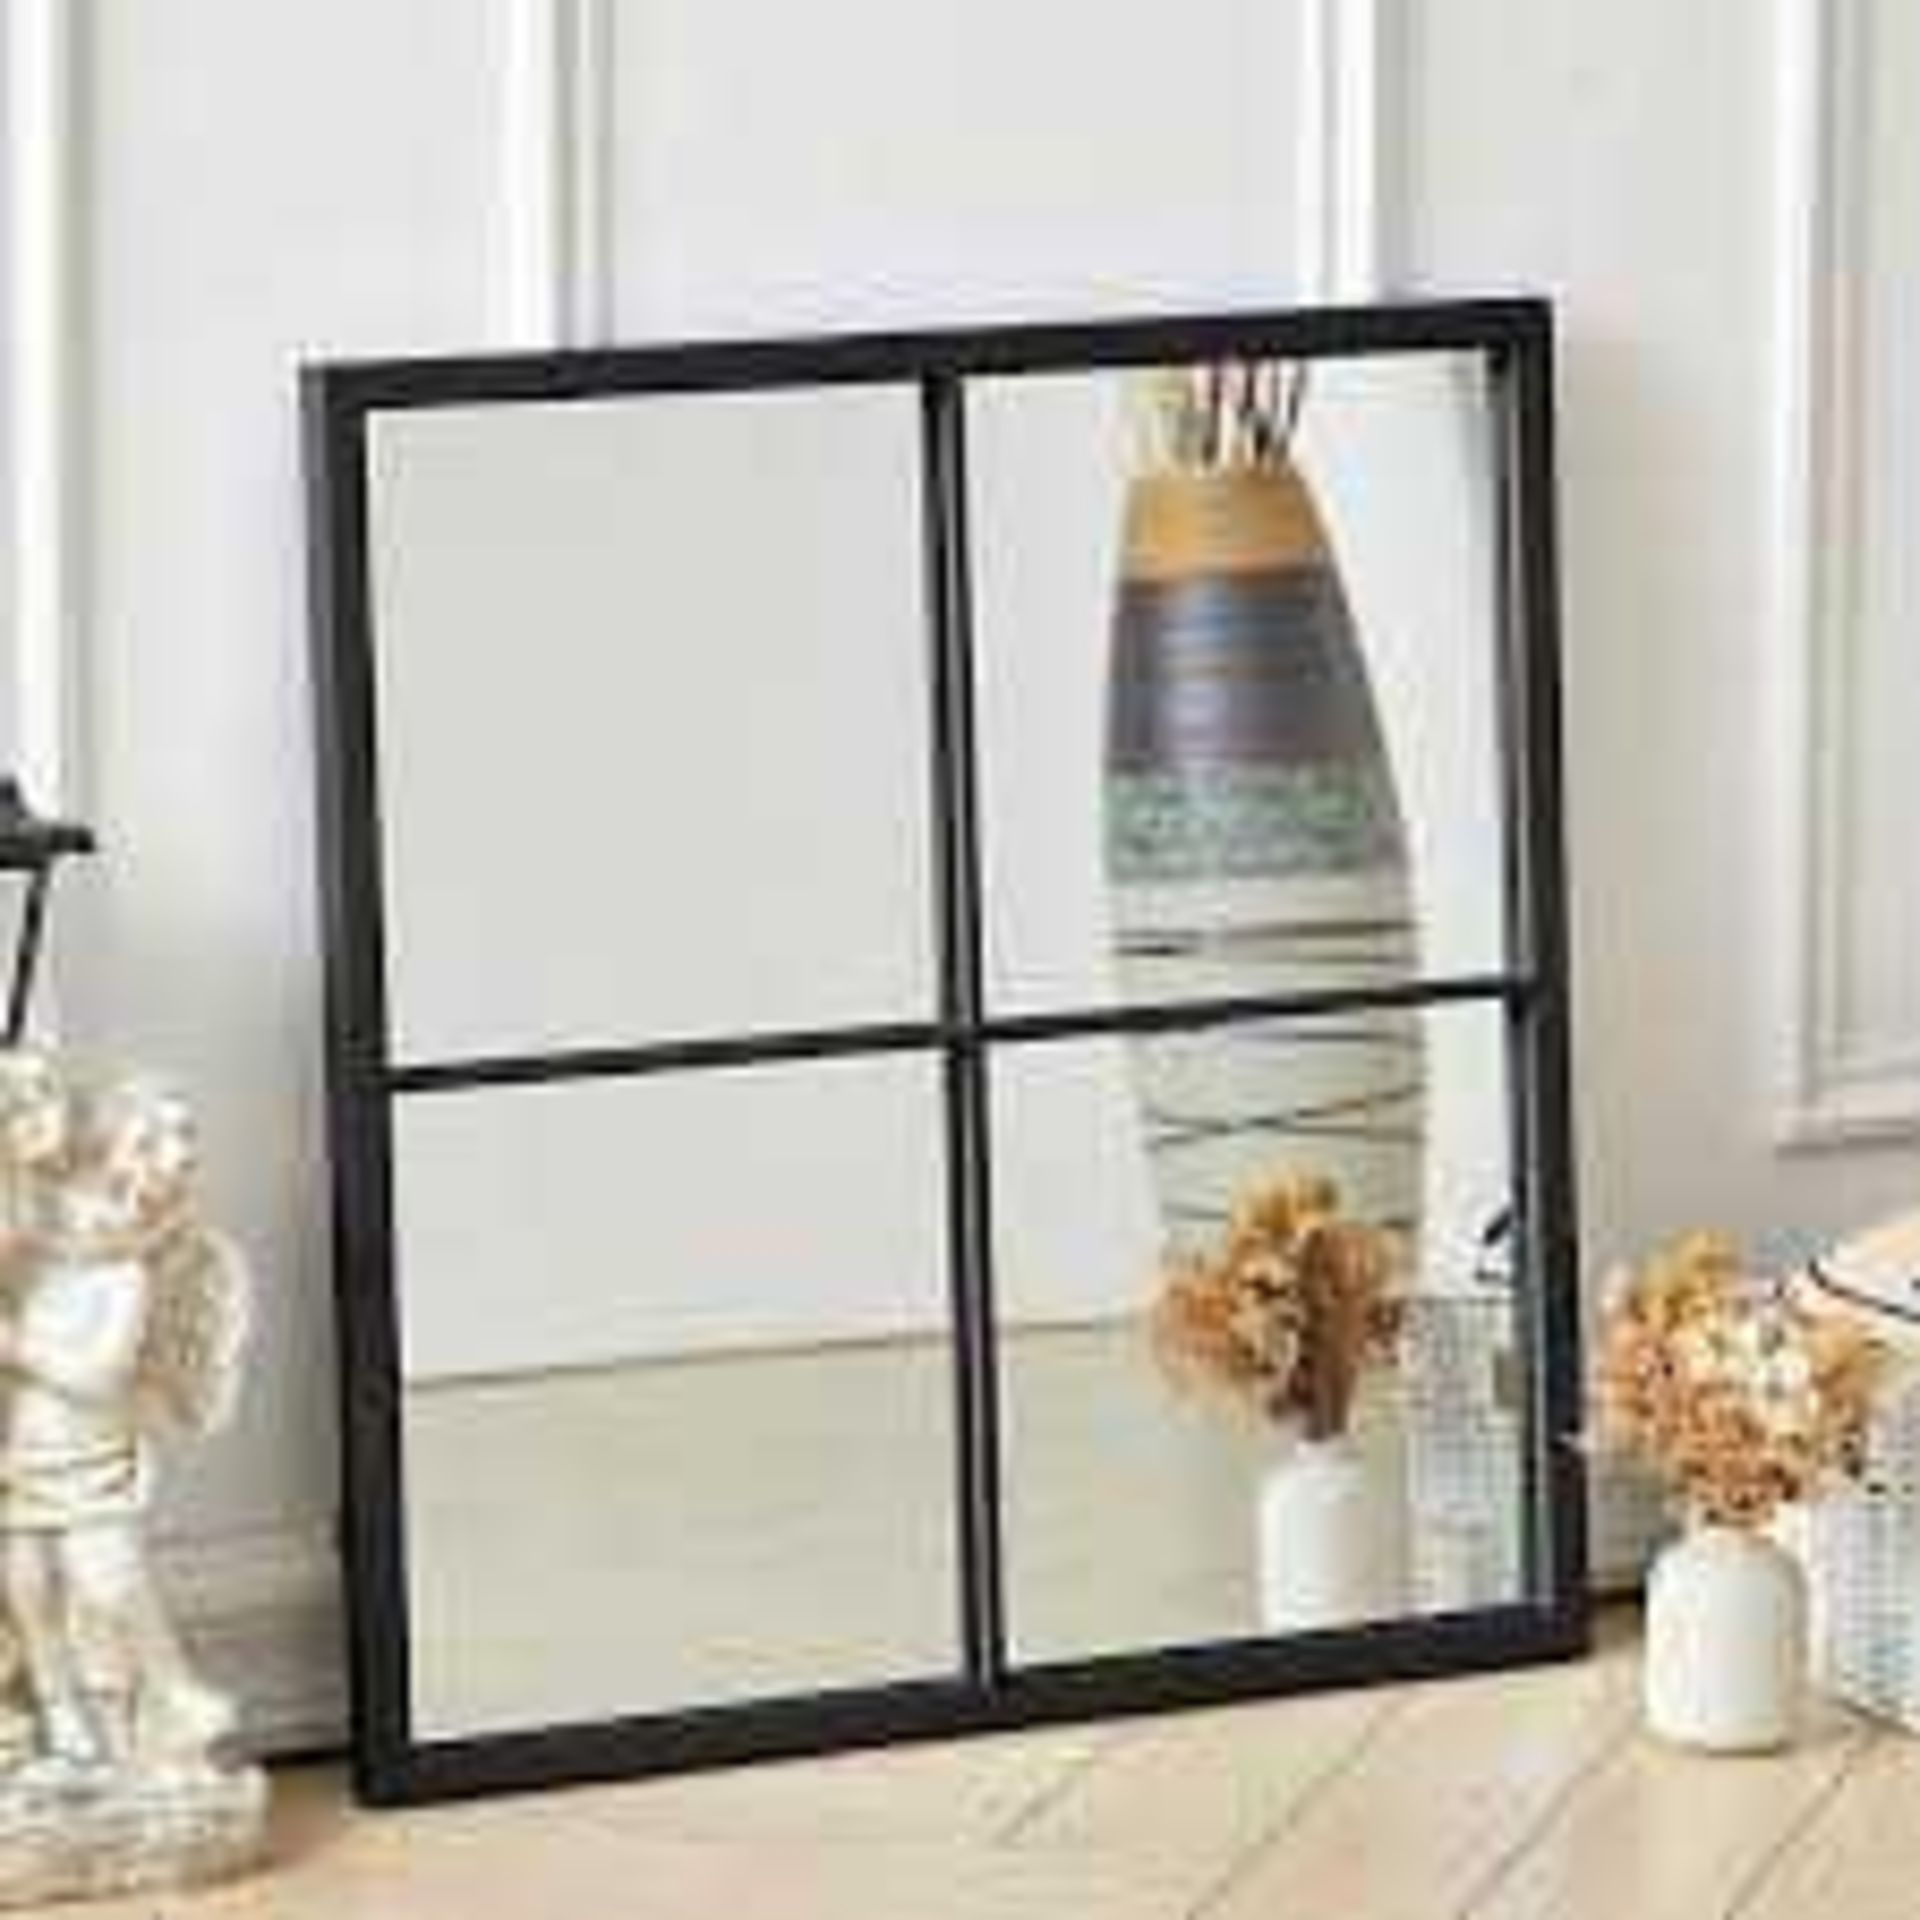 RRP £200 Brand New Boxed My Garden Stories 4 Pane Mirrors - Image 2 of 2